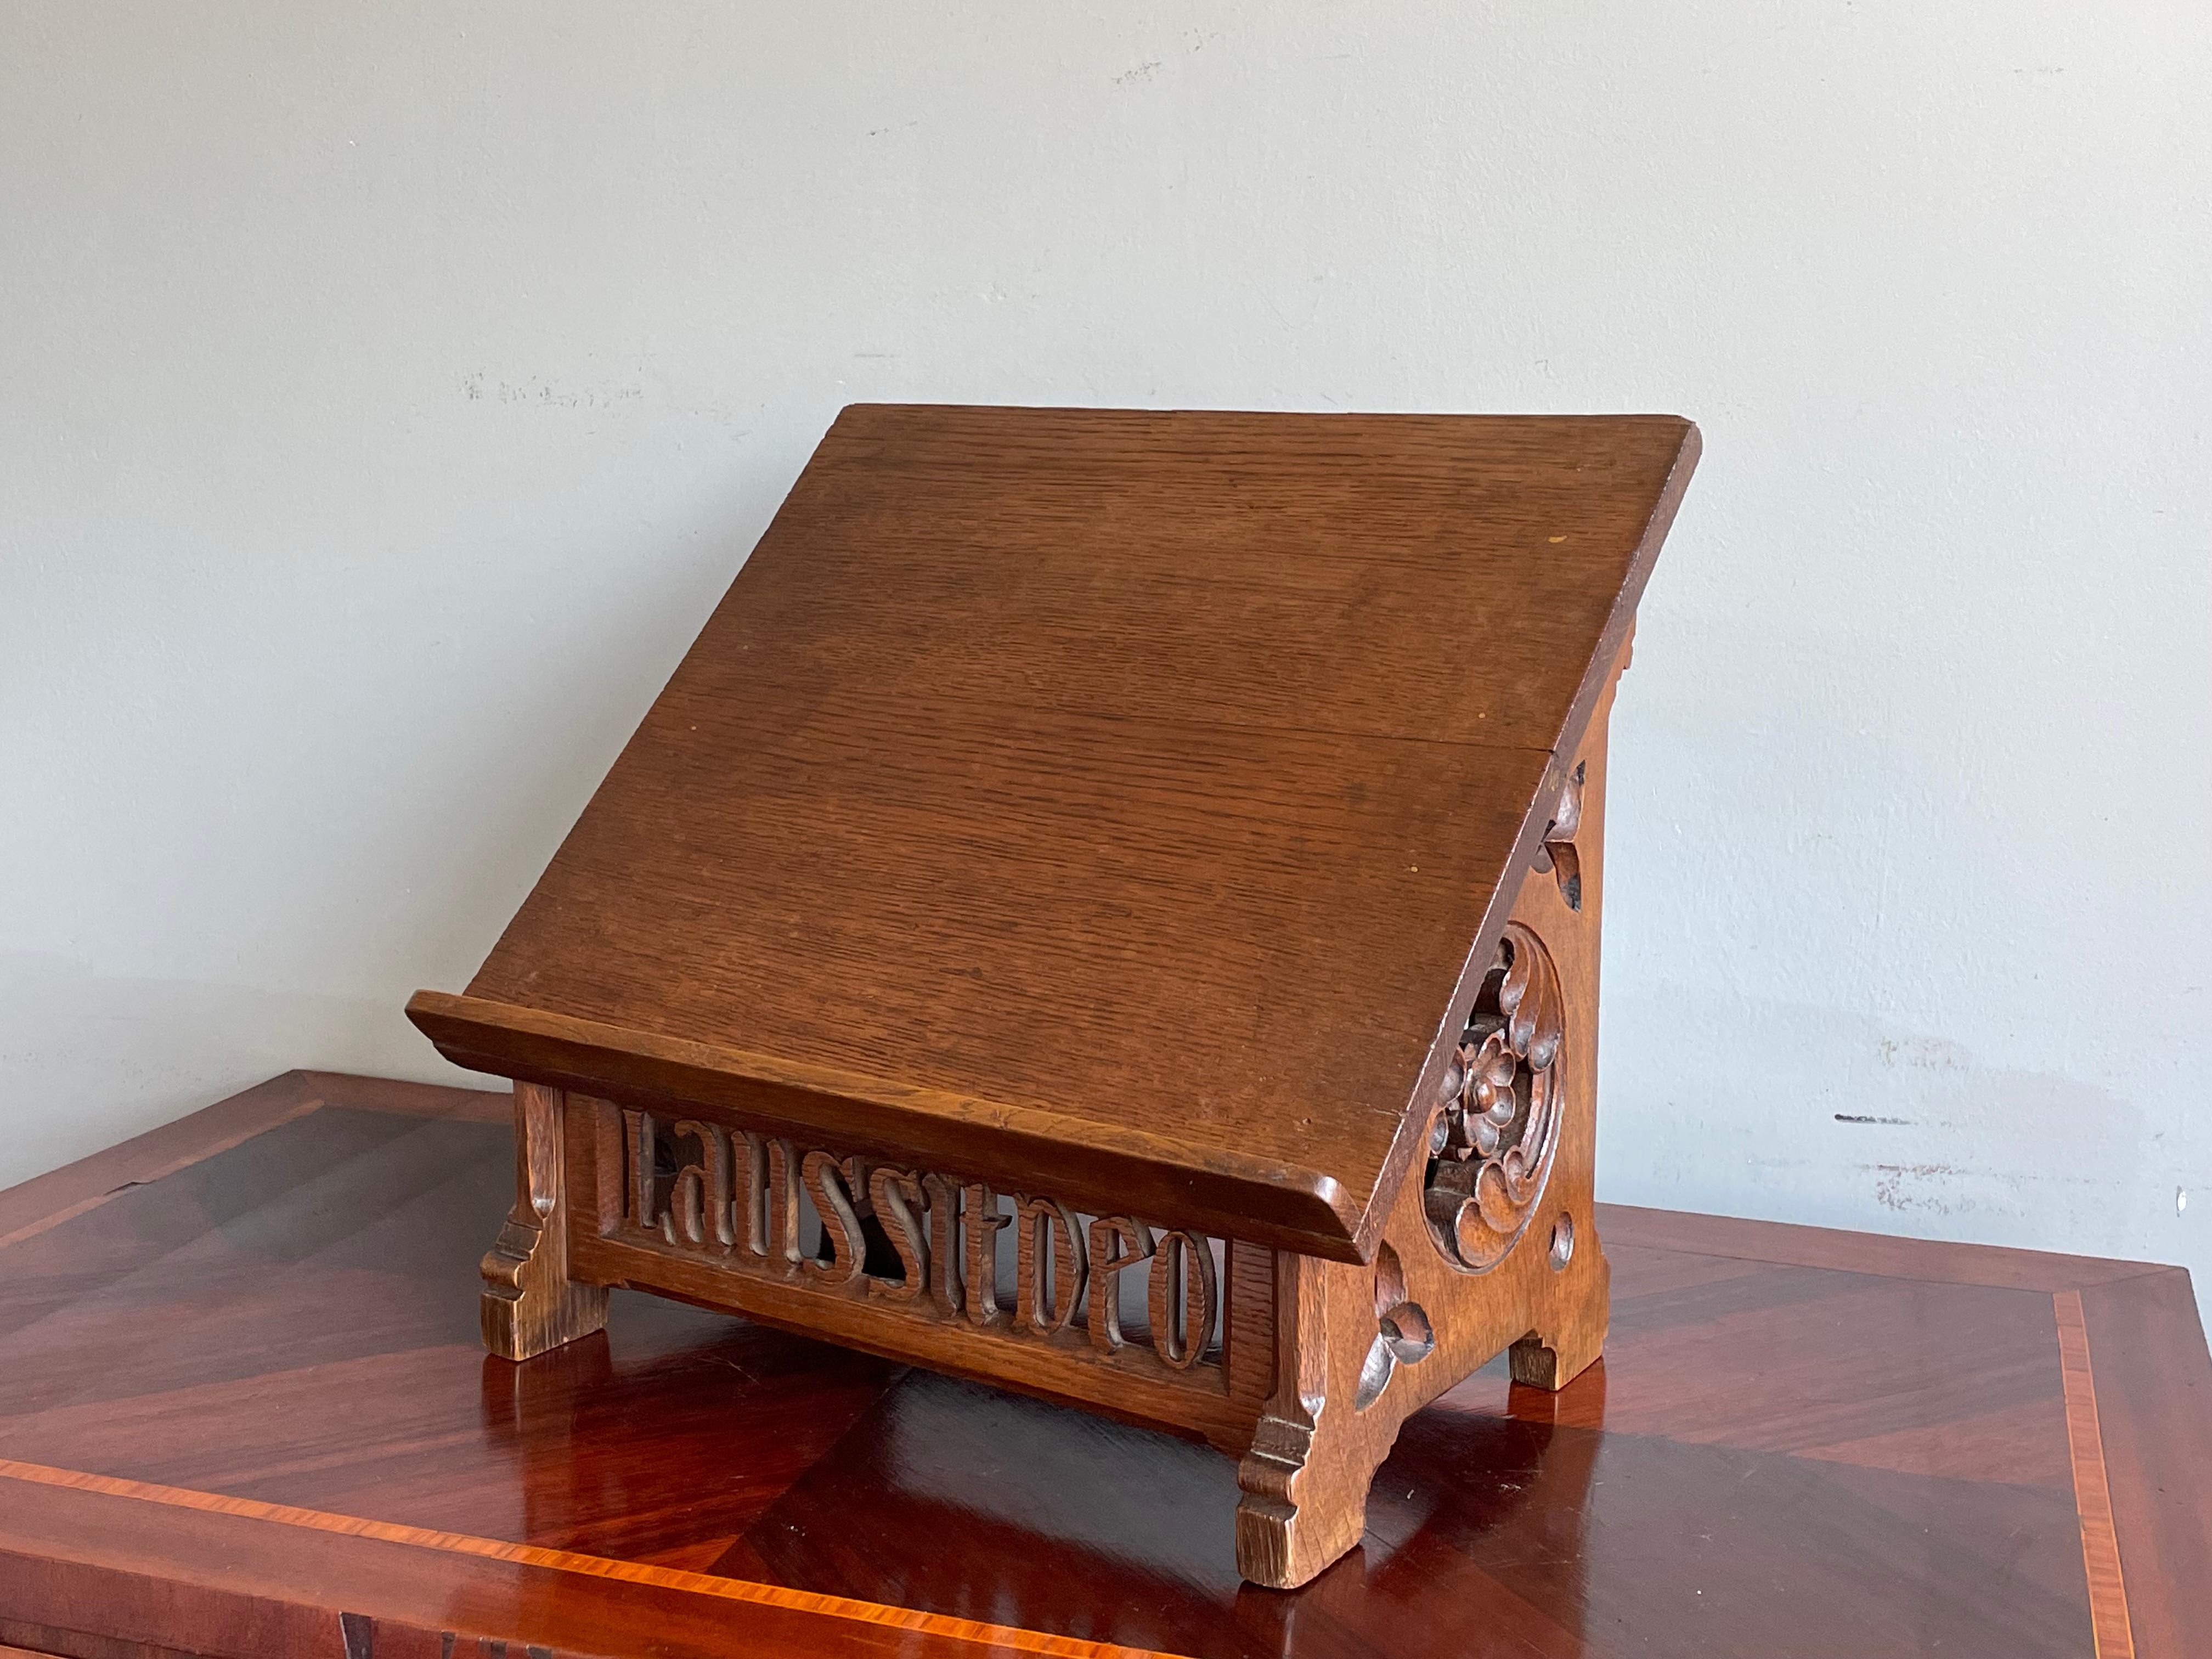 Unique church or monastery bible stand with perfectly hand carved Laus Sit Deo text.

This beautifully hand carved Gothic bible stand dates from circa 1890-1900 and it is entirely made of solid oak. This unique church bible stand is in very good